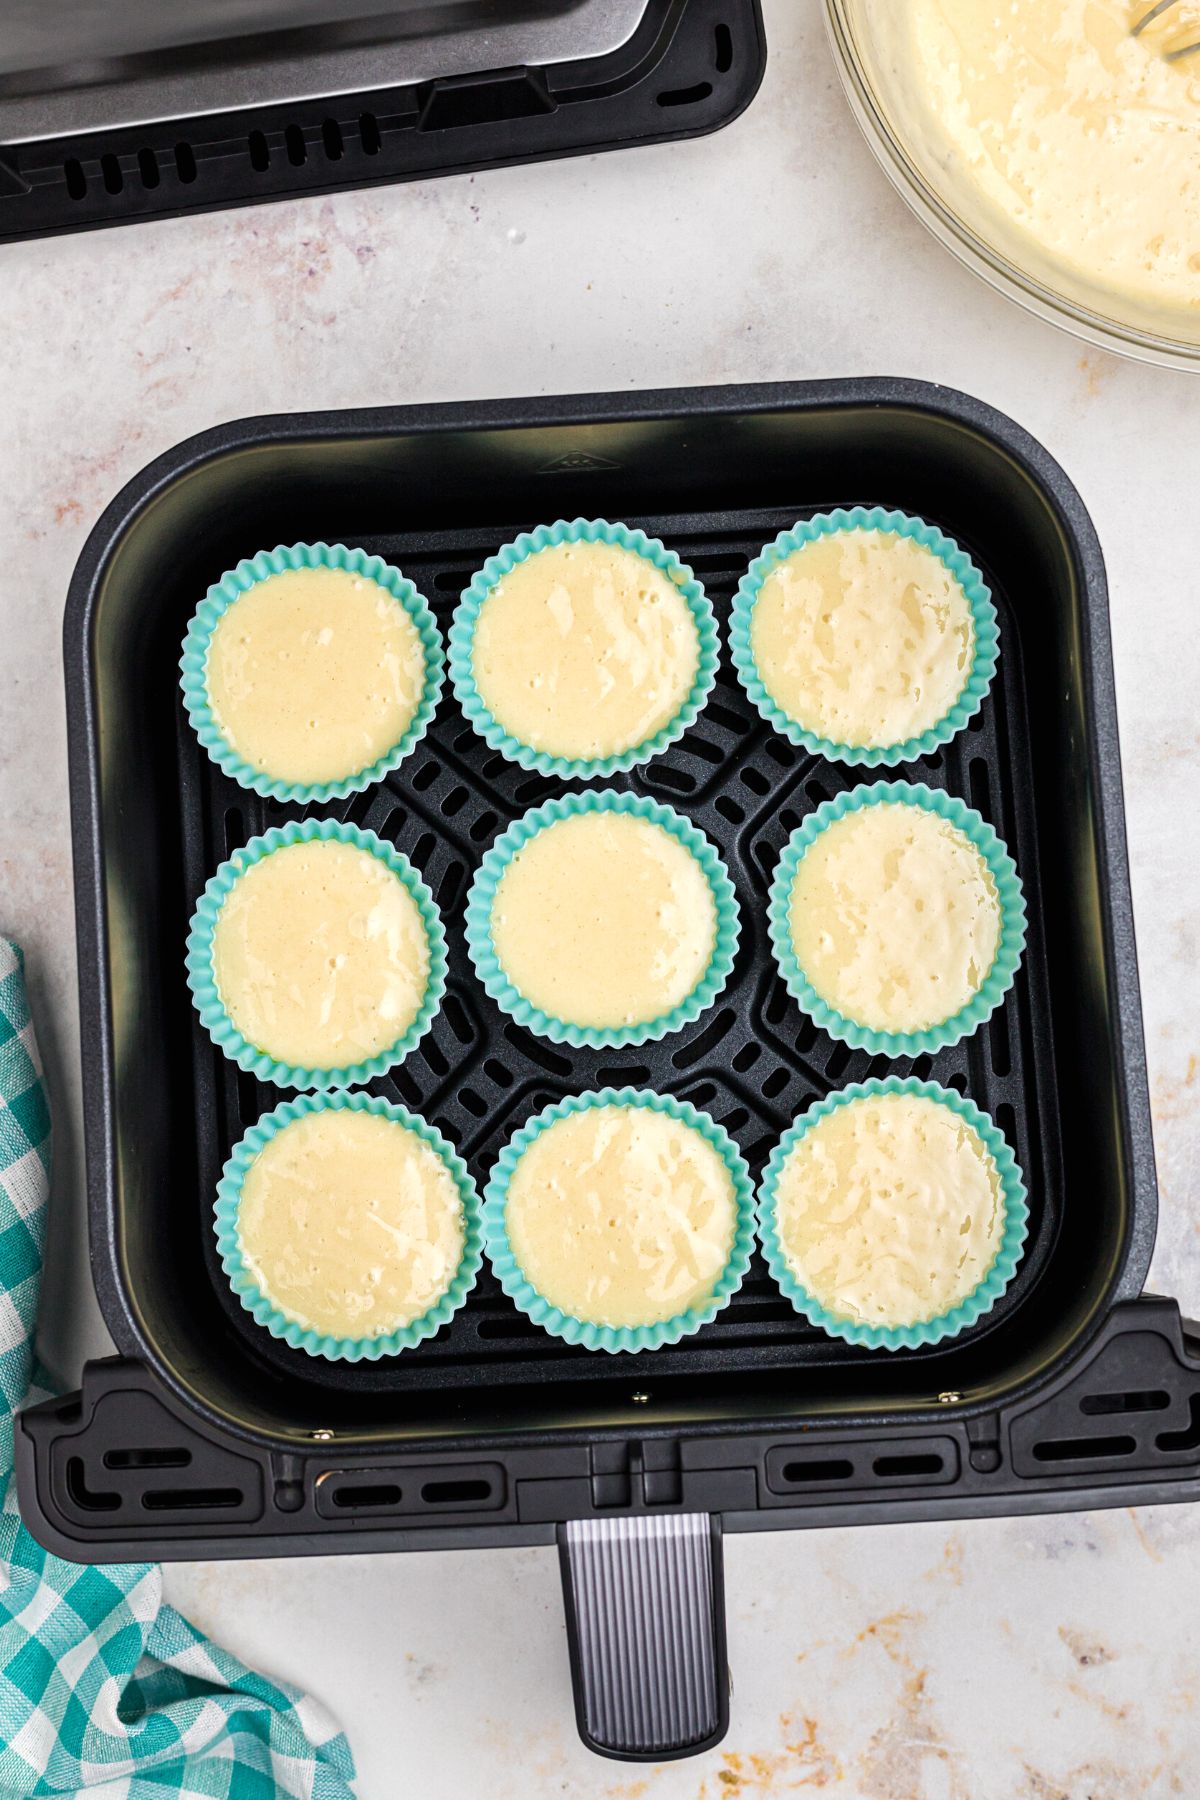 Silicone muffin liners filled with cake batter in the air fryer basket